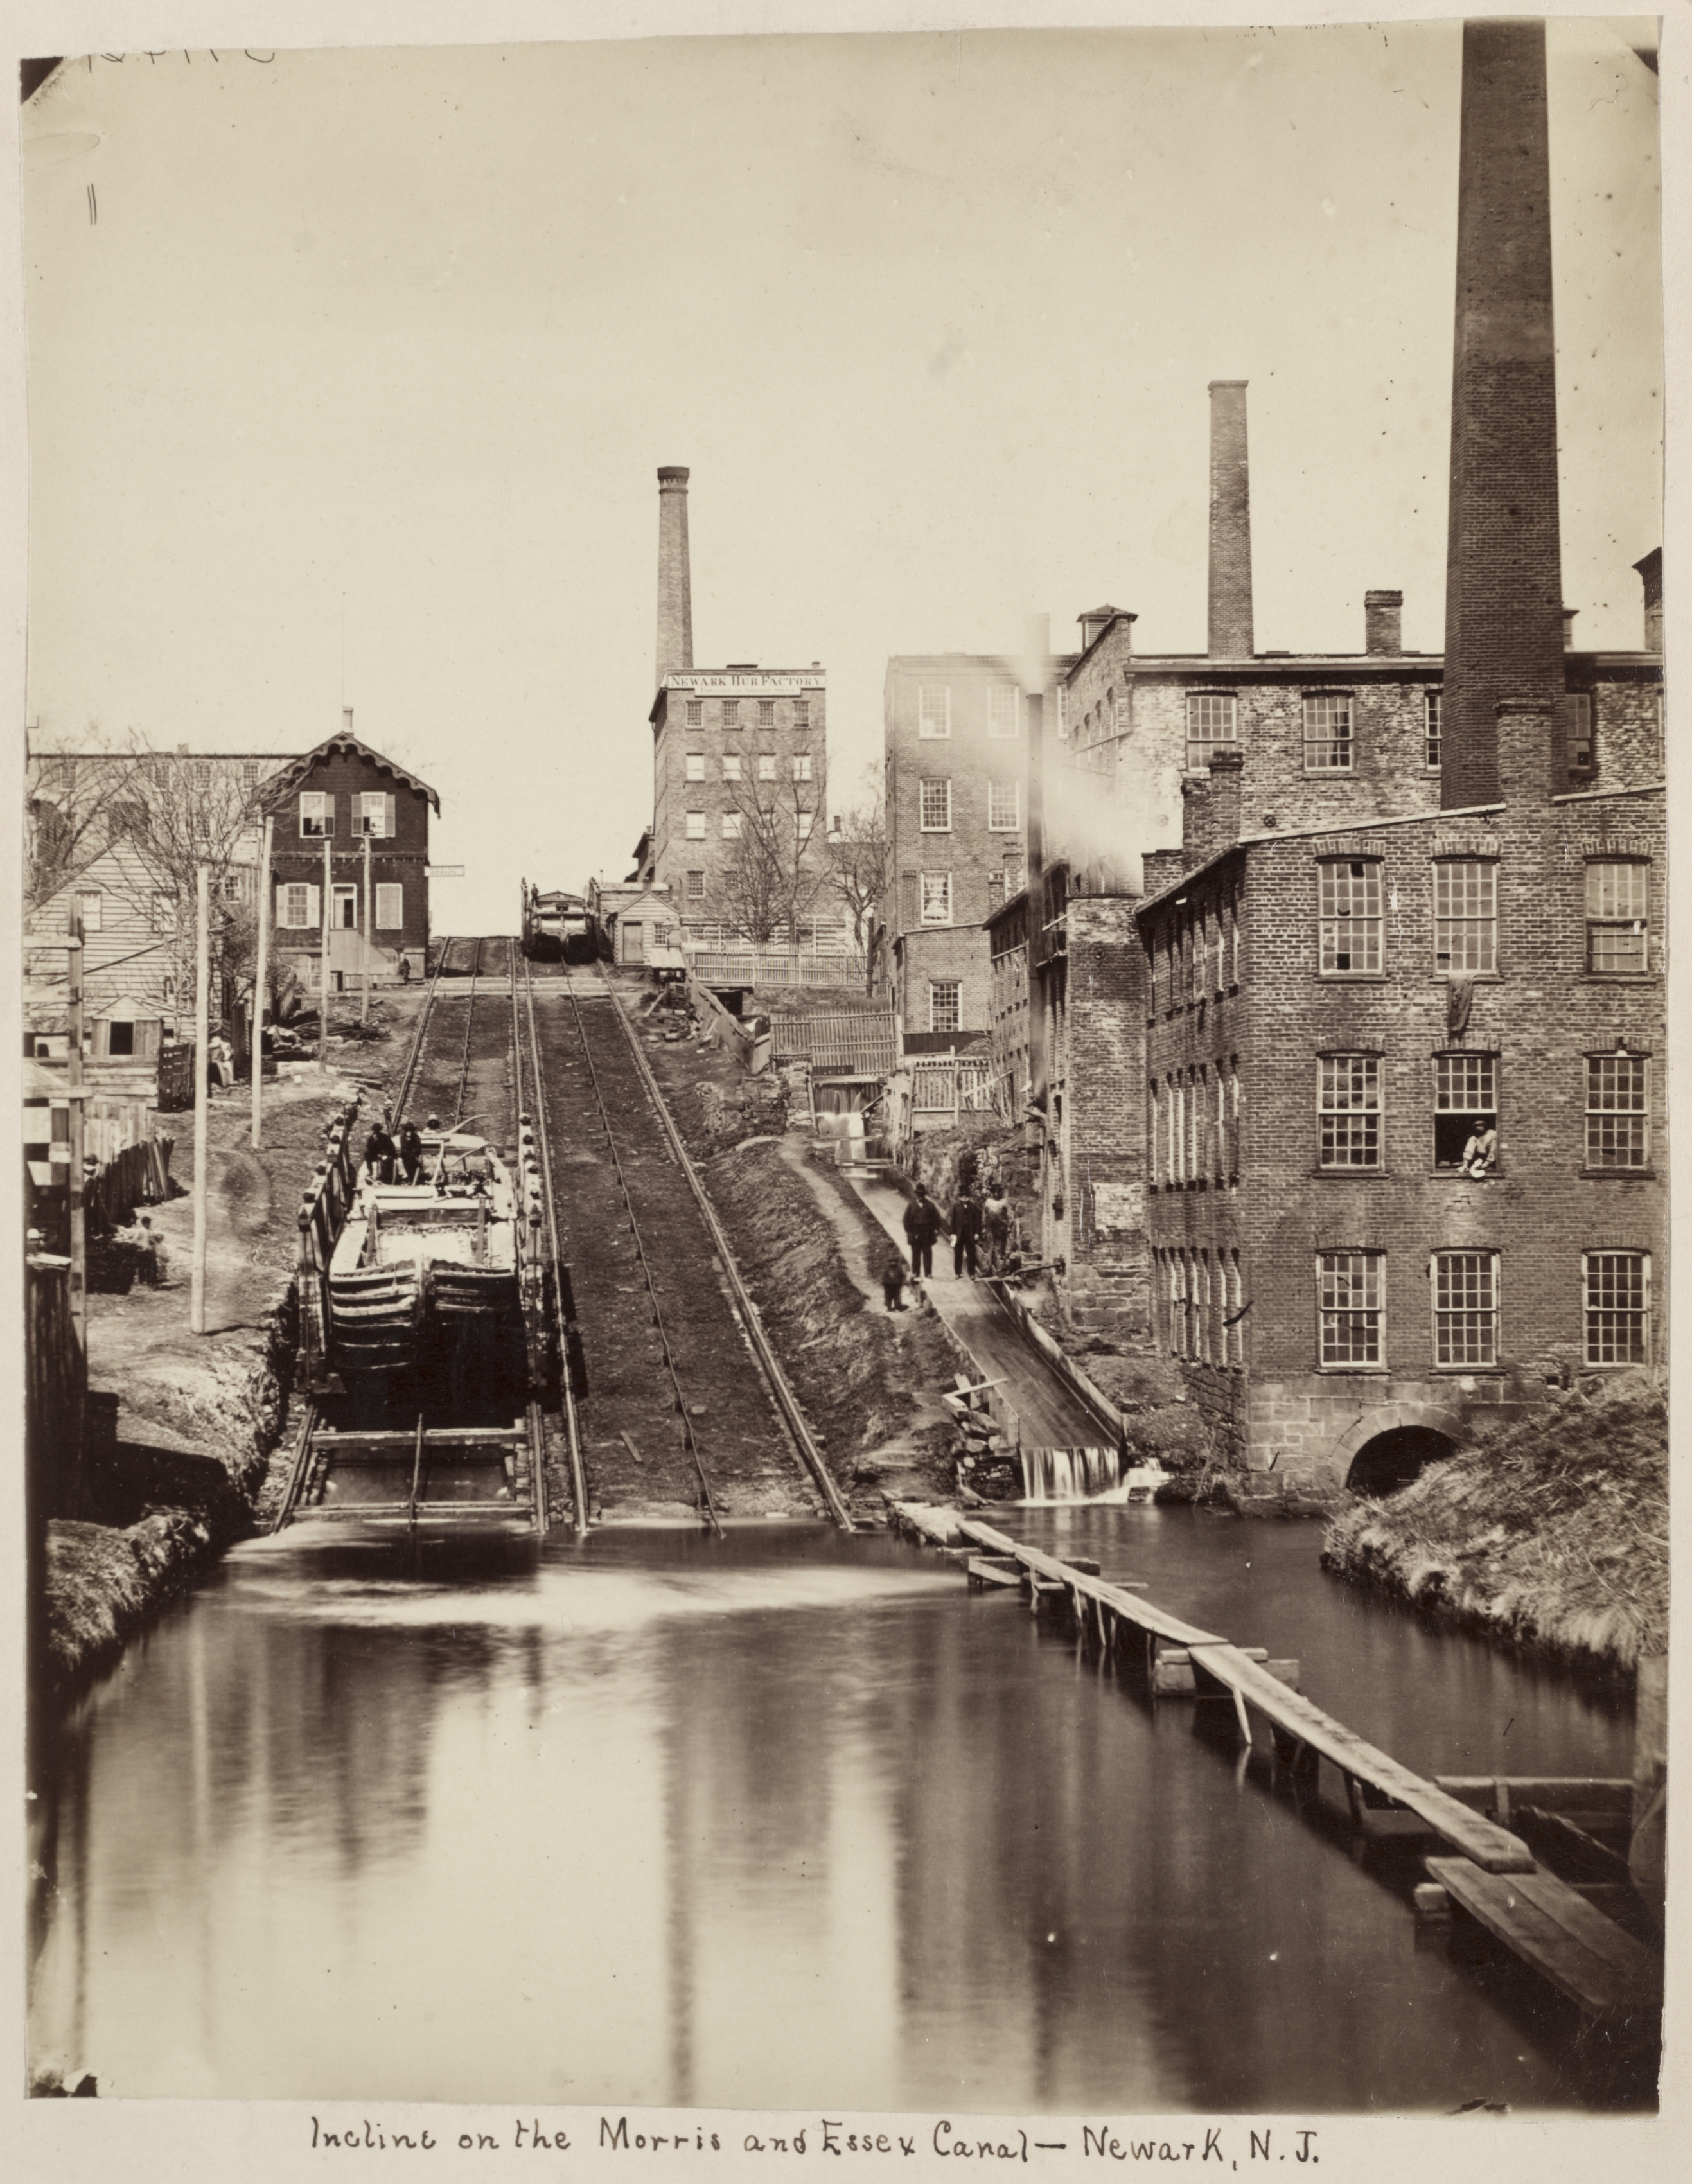 Incline on the Morris and Essex Canal, Newark, New Jersey